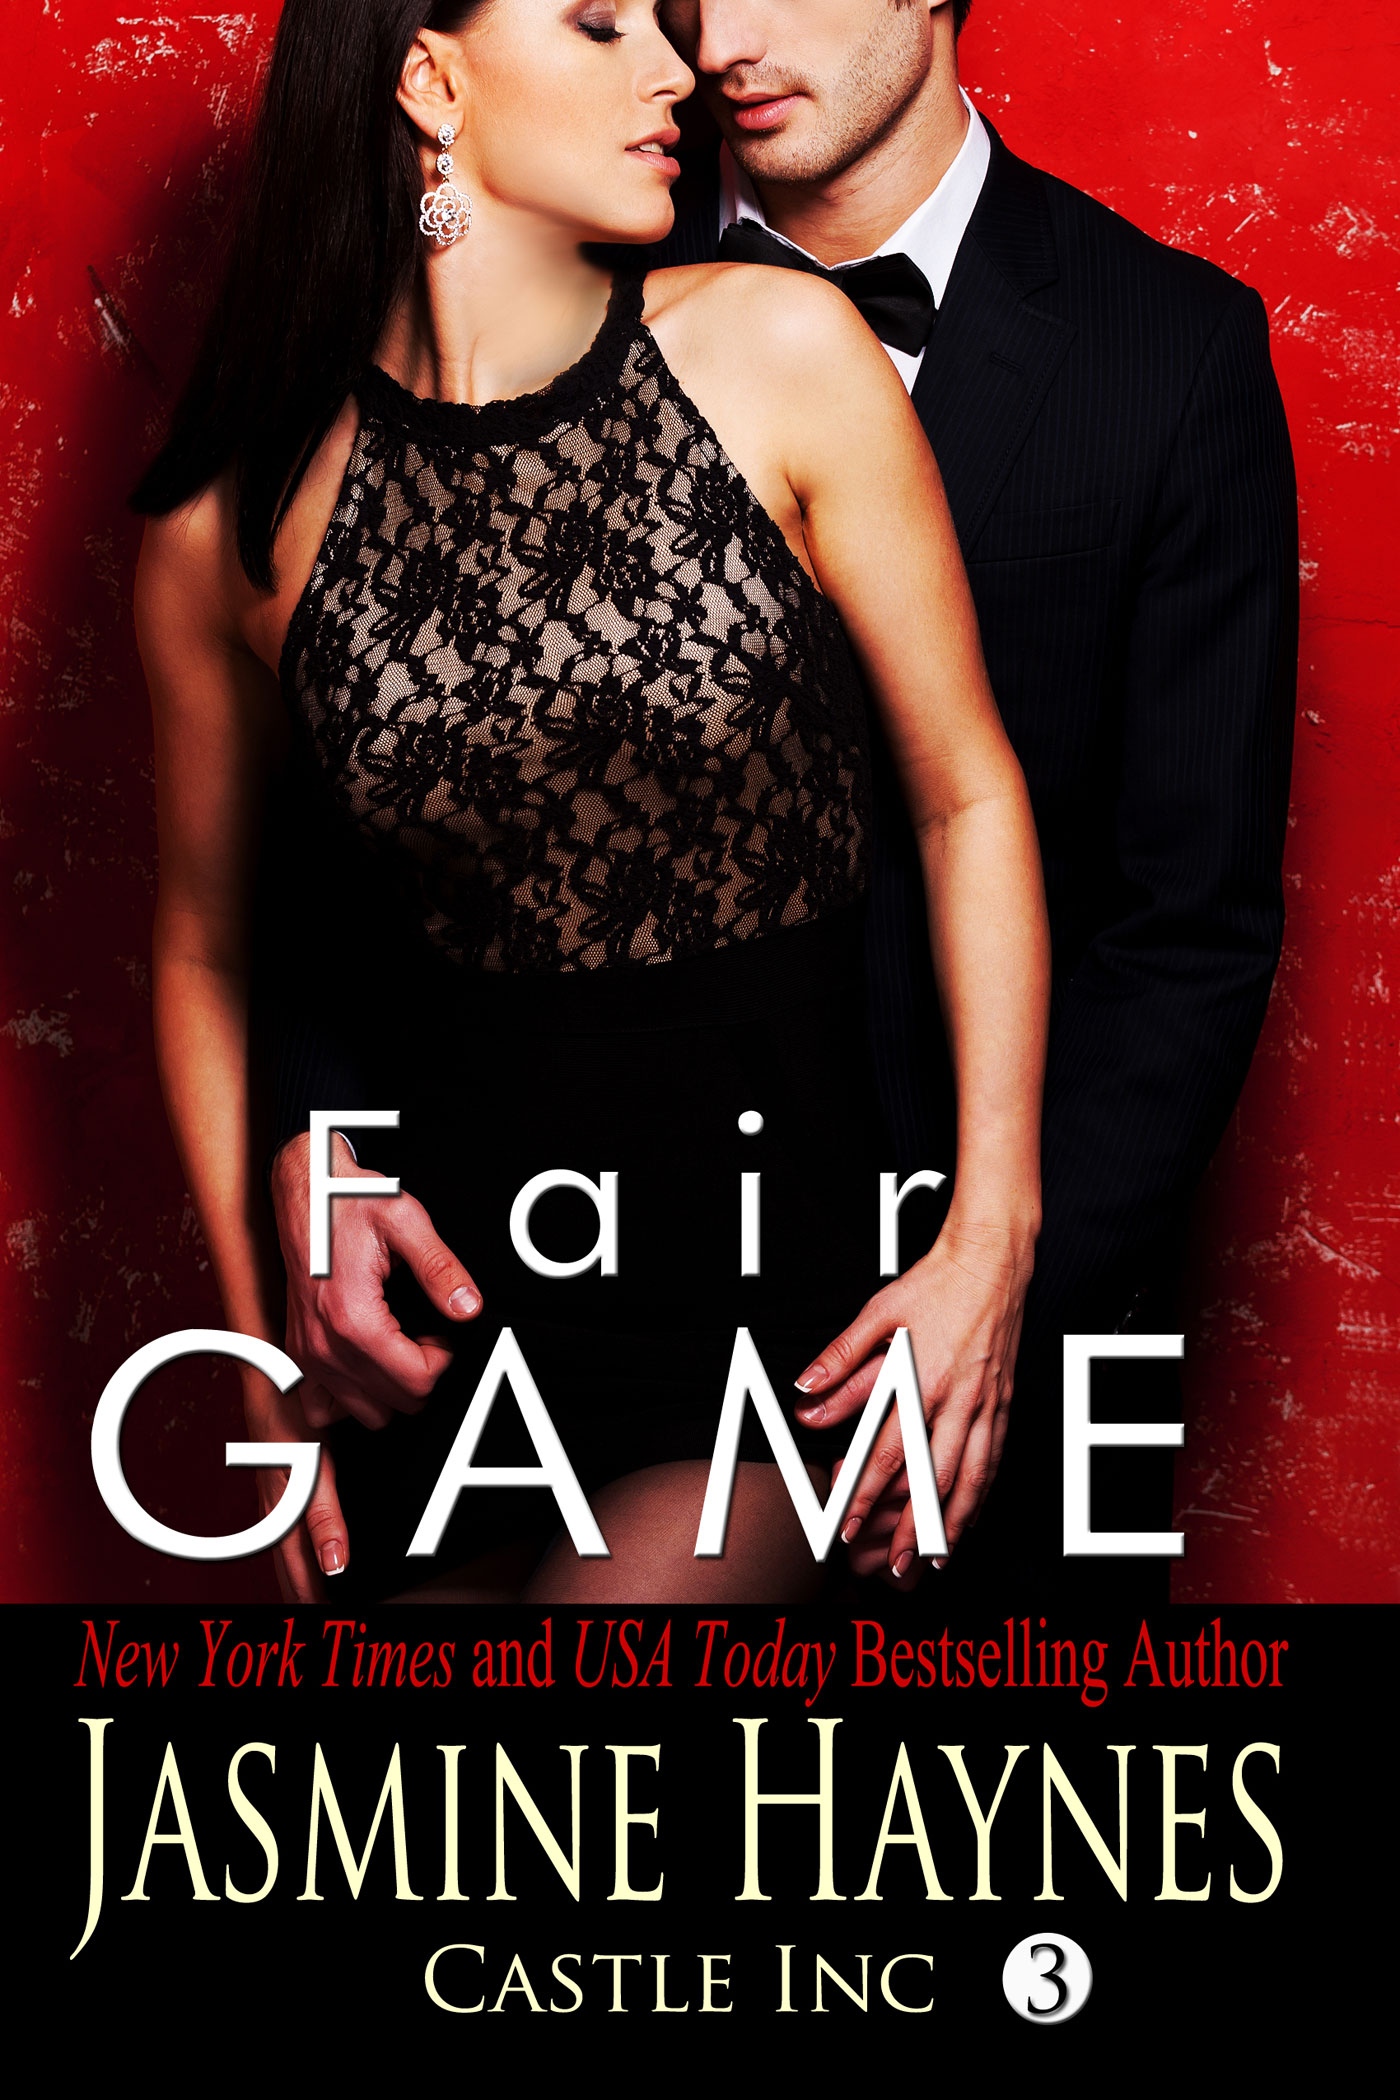 Cover of Fair Game by New York Times and USA Today Bestselling Author Jasmine Haynes - Castle Inc 3